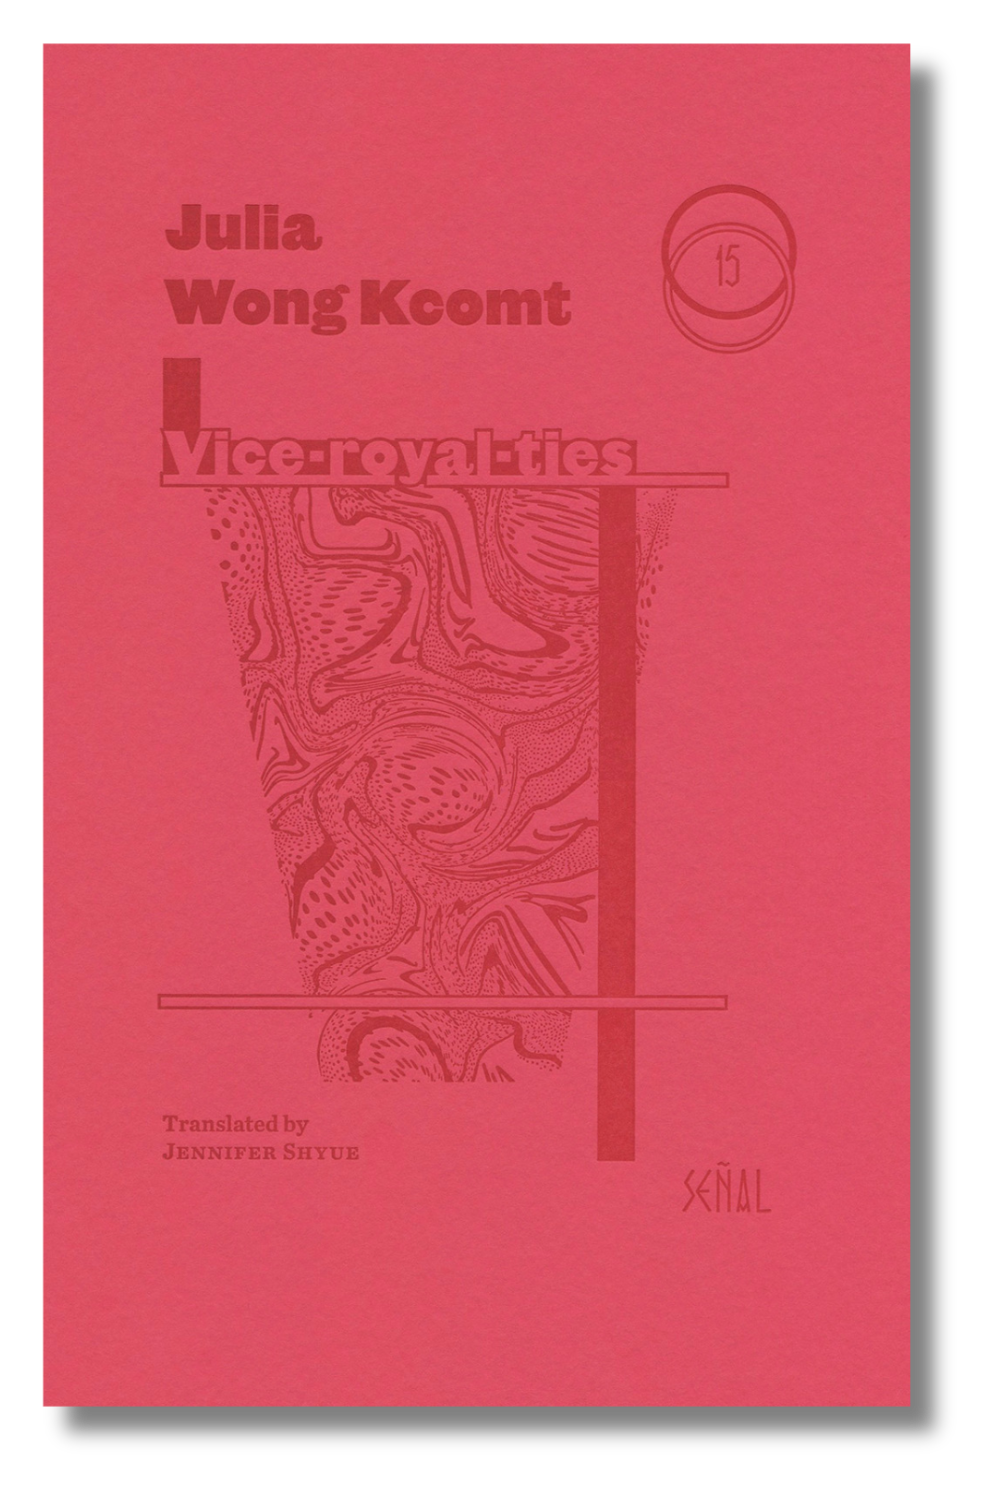 The cover of "Vice-Royal-Ties" by Julia Wong Kcomt